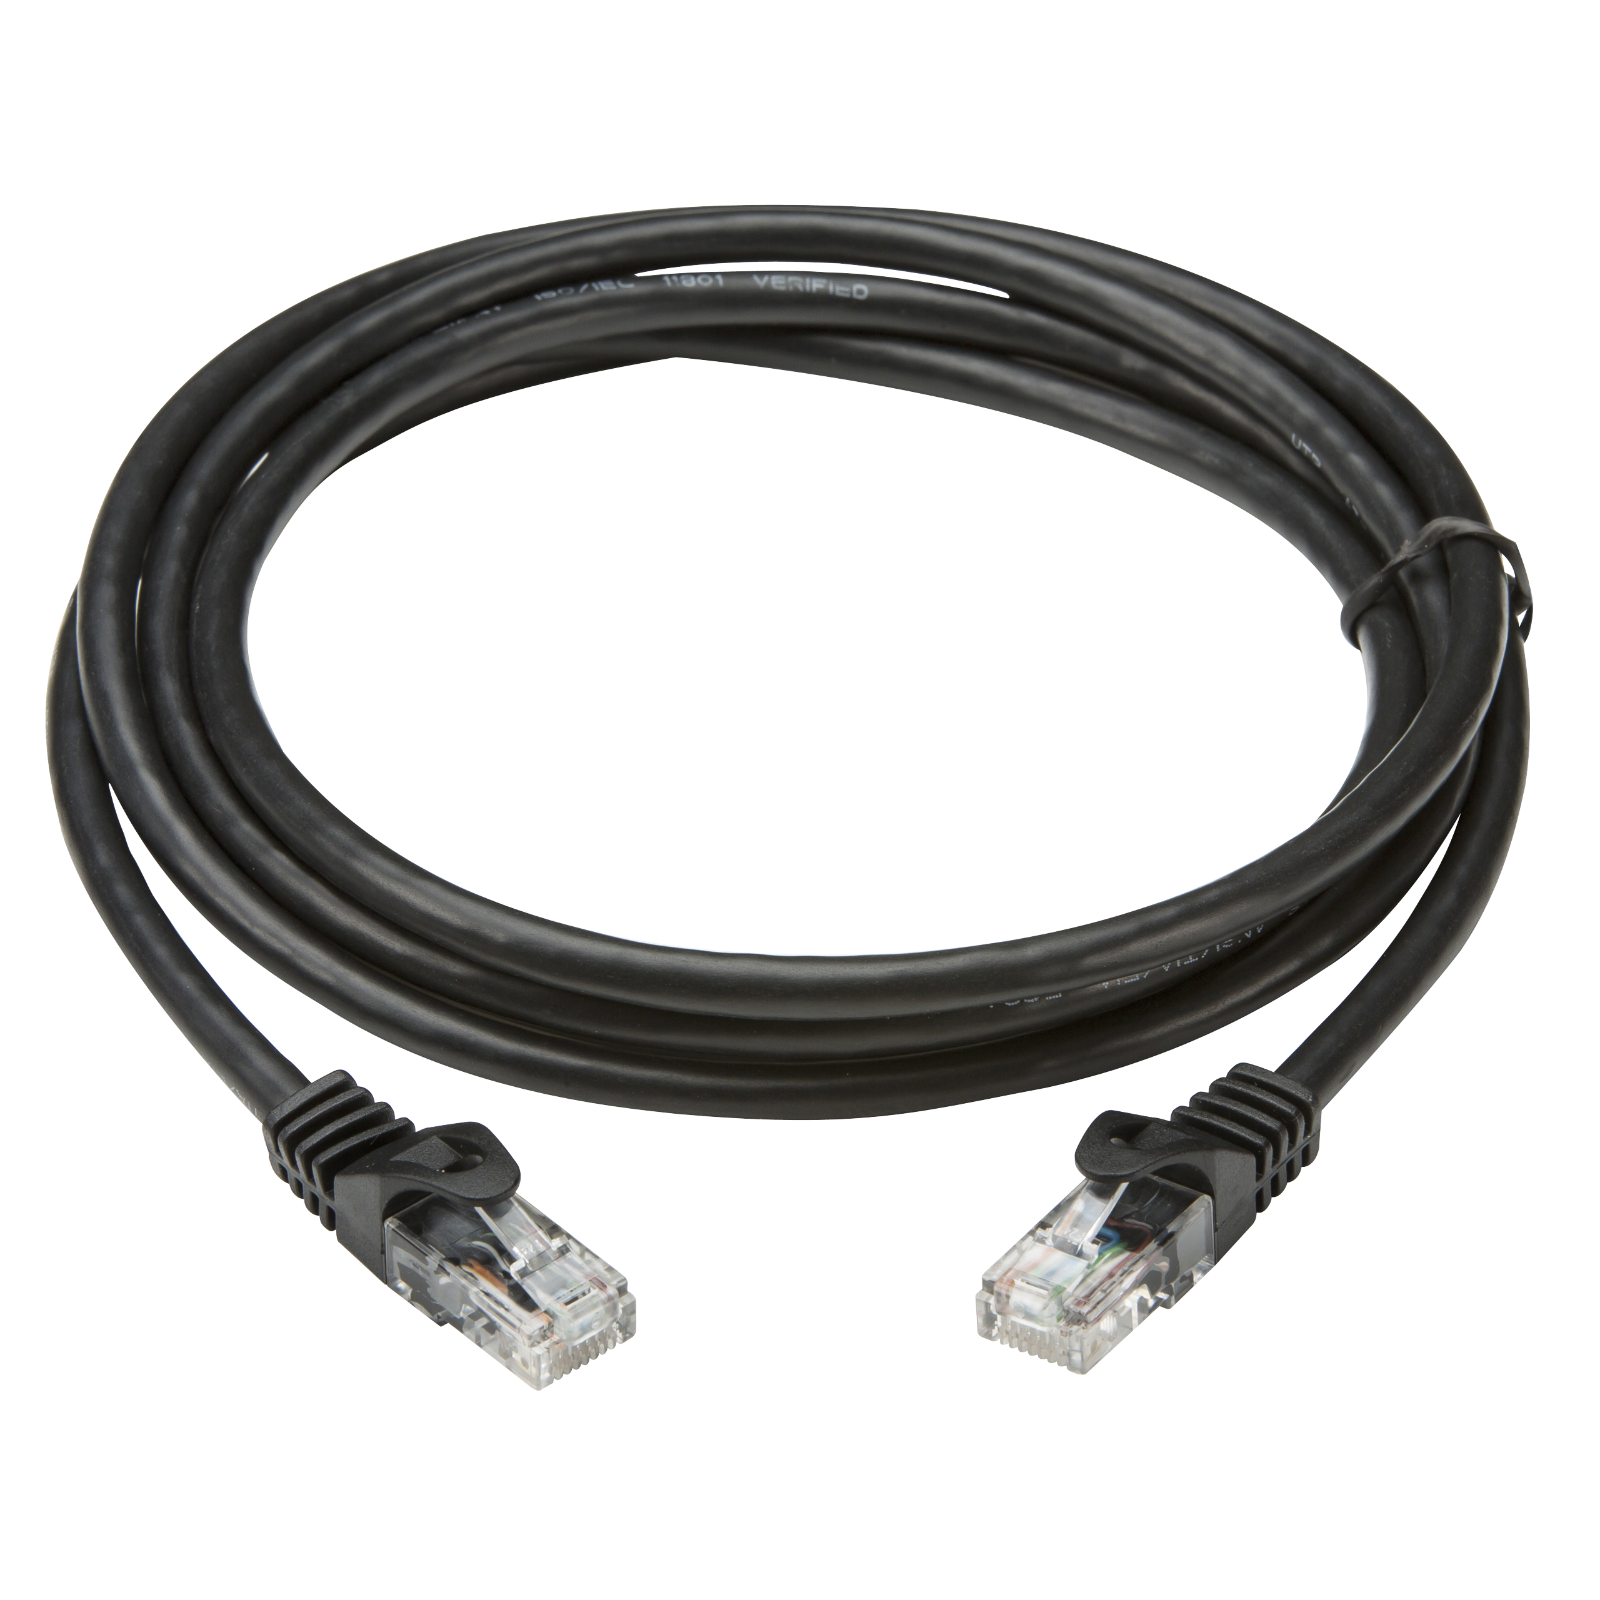 10m UTP CAT6 Networking Cable - Black - NETC610M 